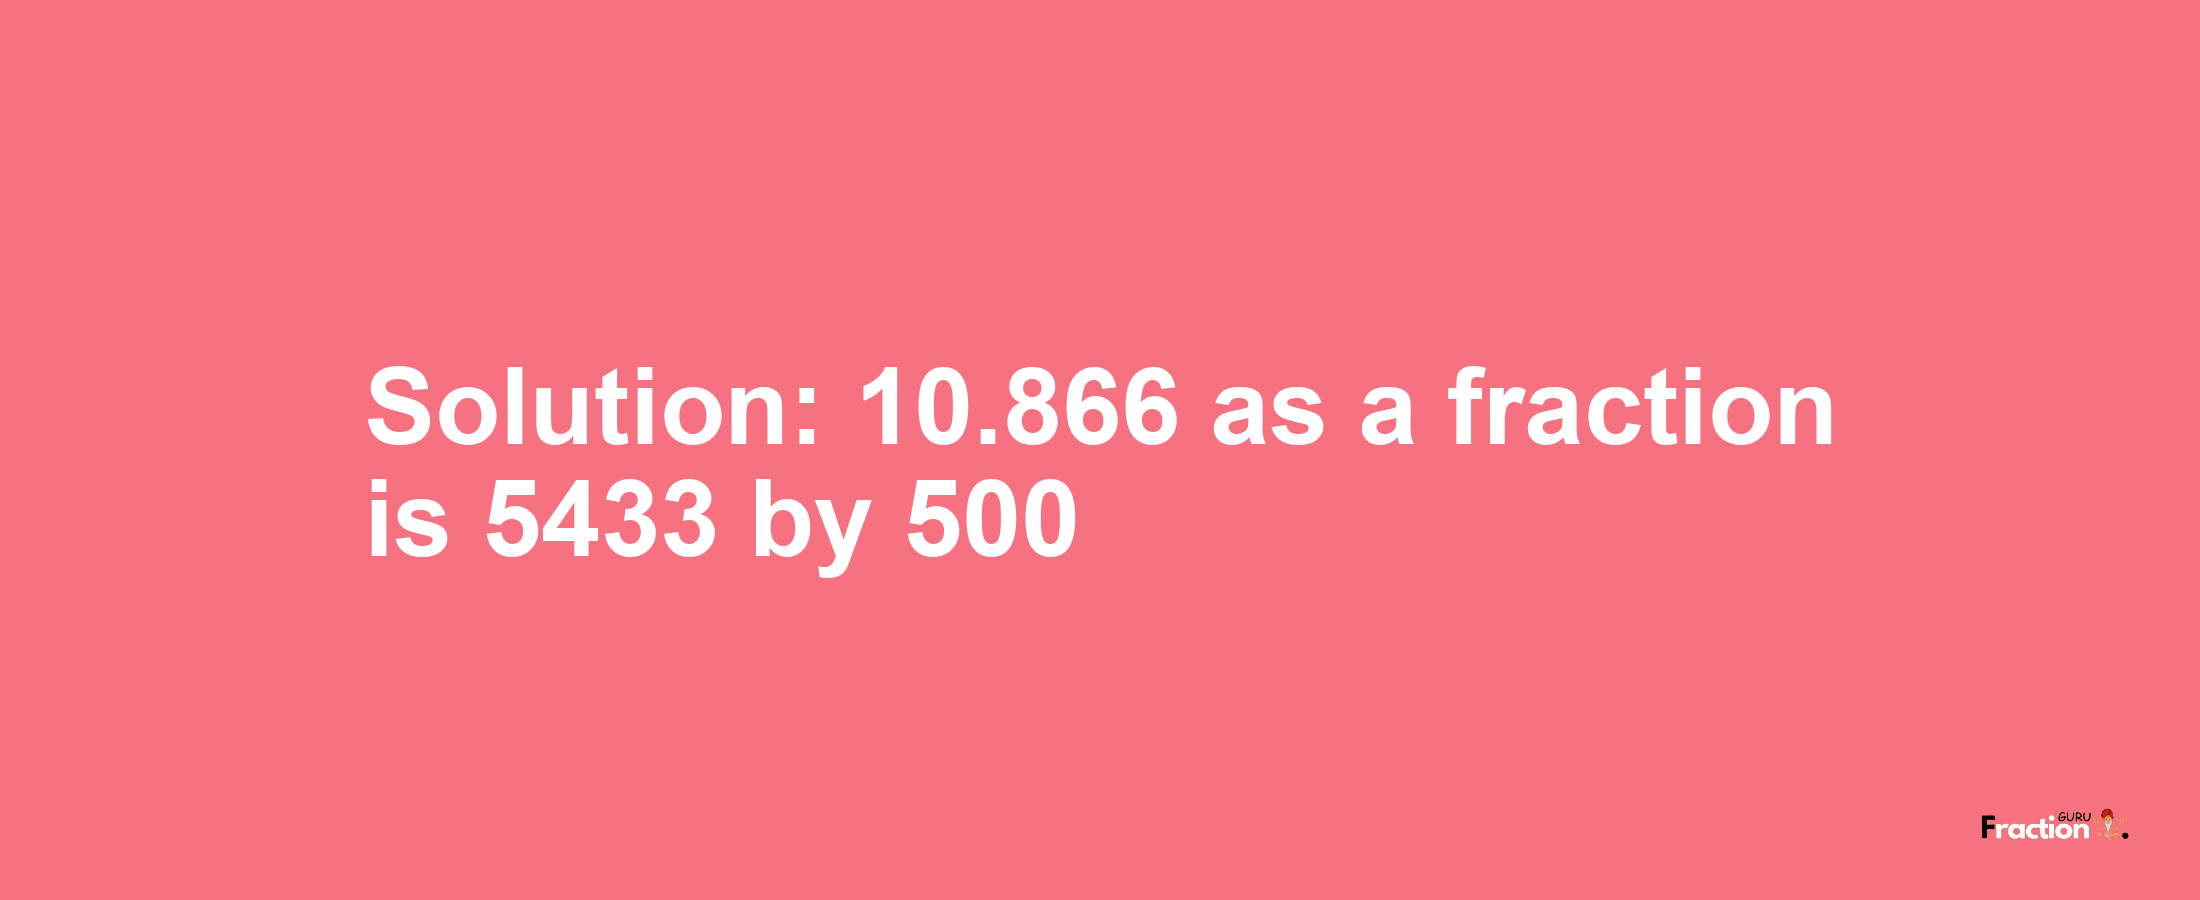 Solution:10.866 as a fraction is 5433/500